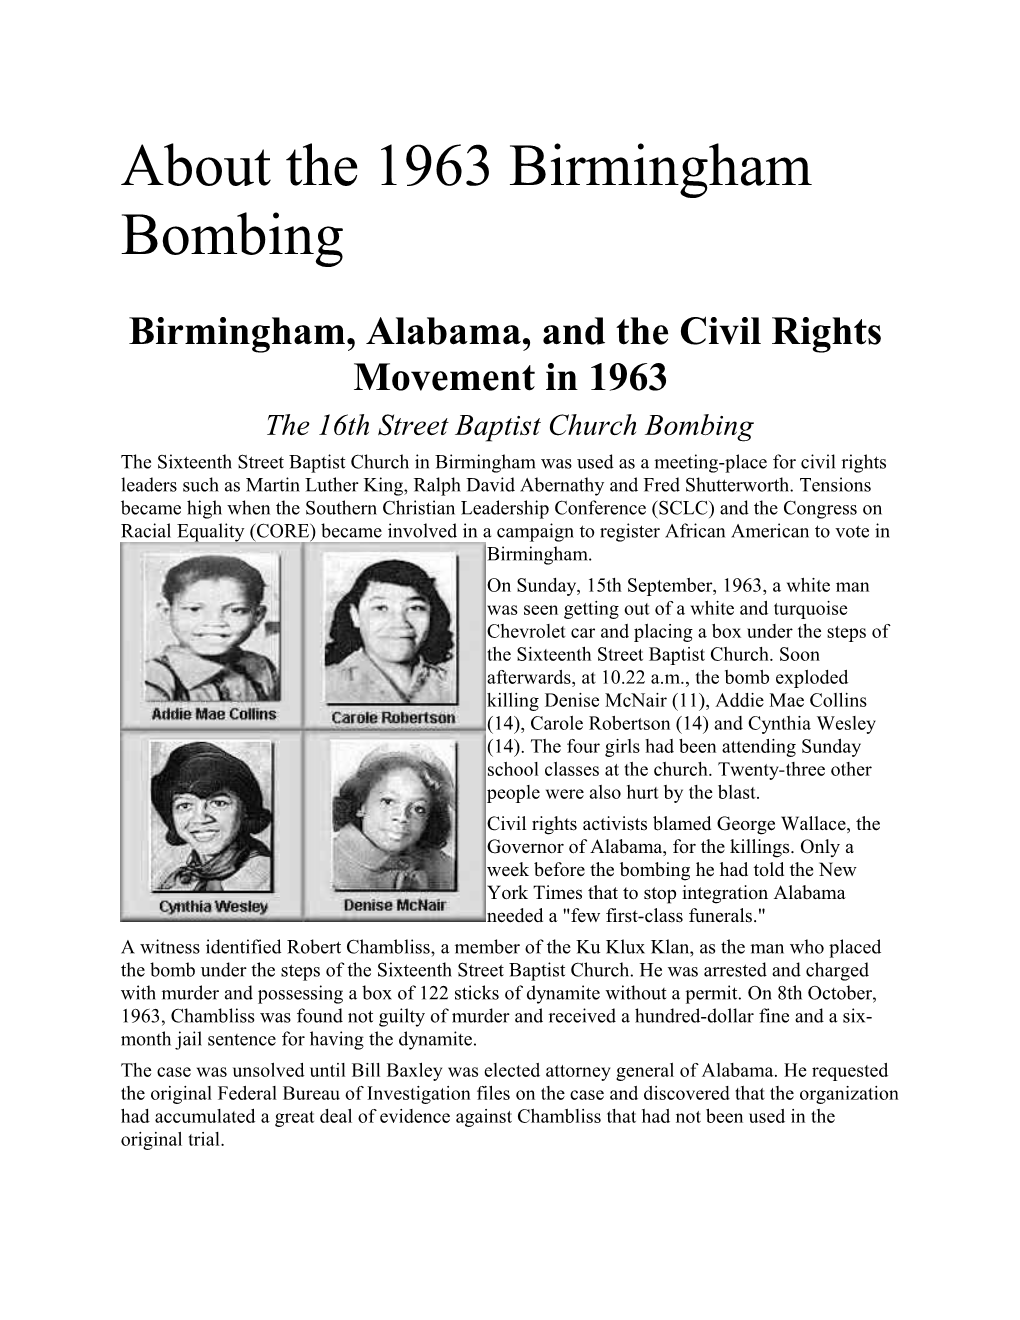 About the 1963 Birmingham Bombing